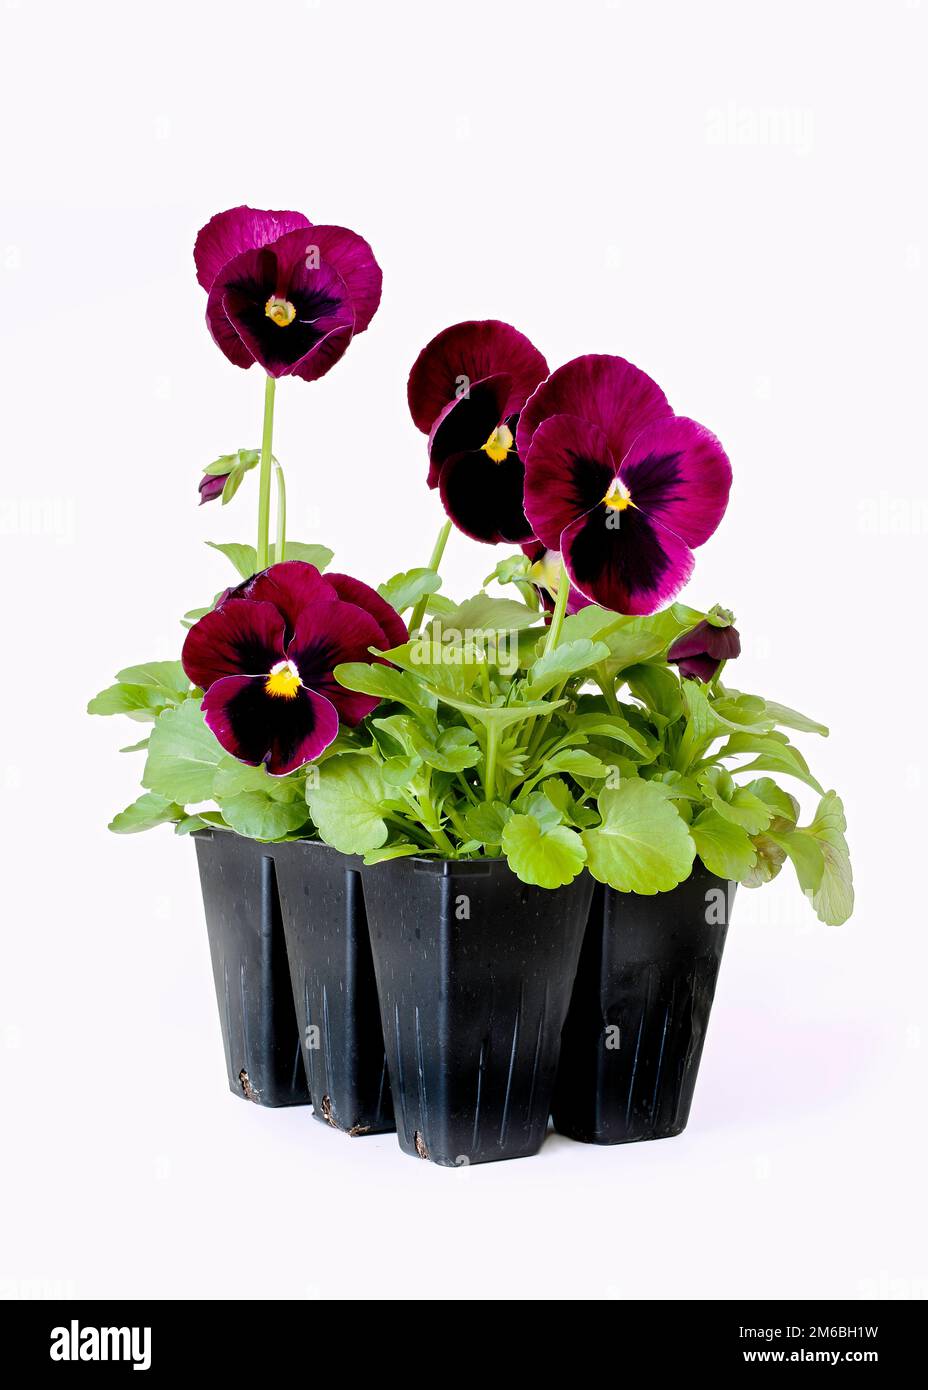 A pack of magenta colored pansy transplants. Stock Photo